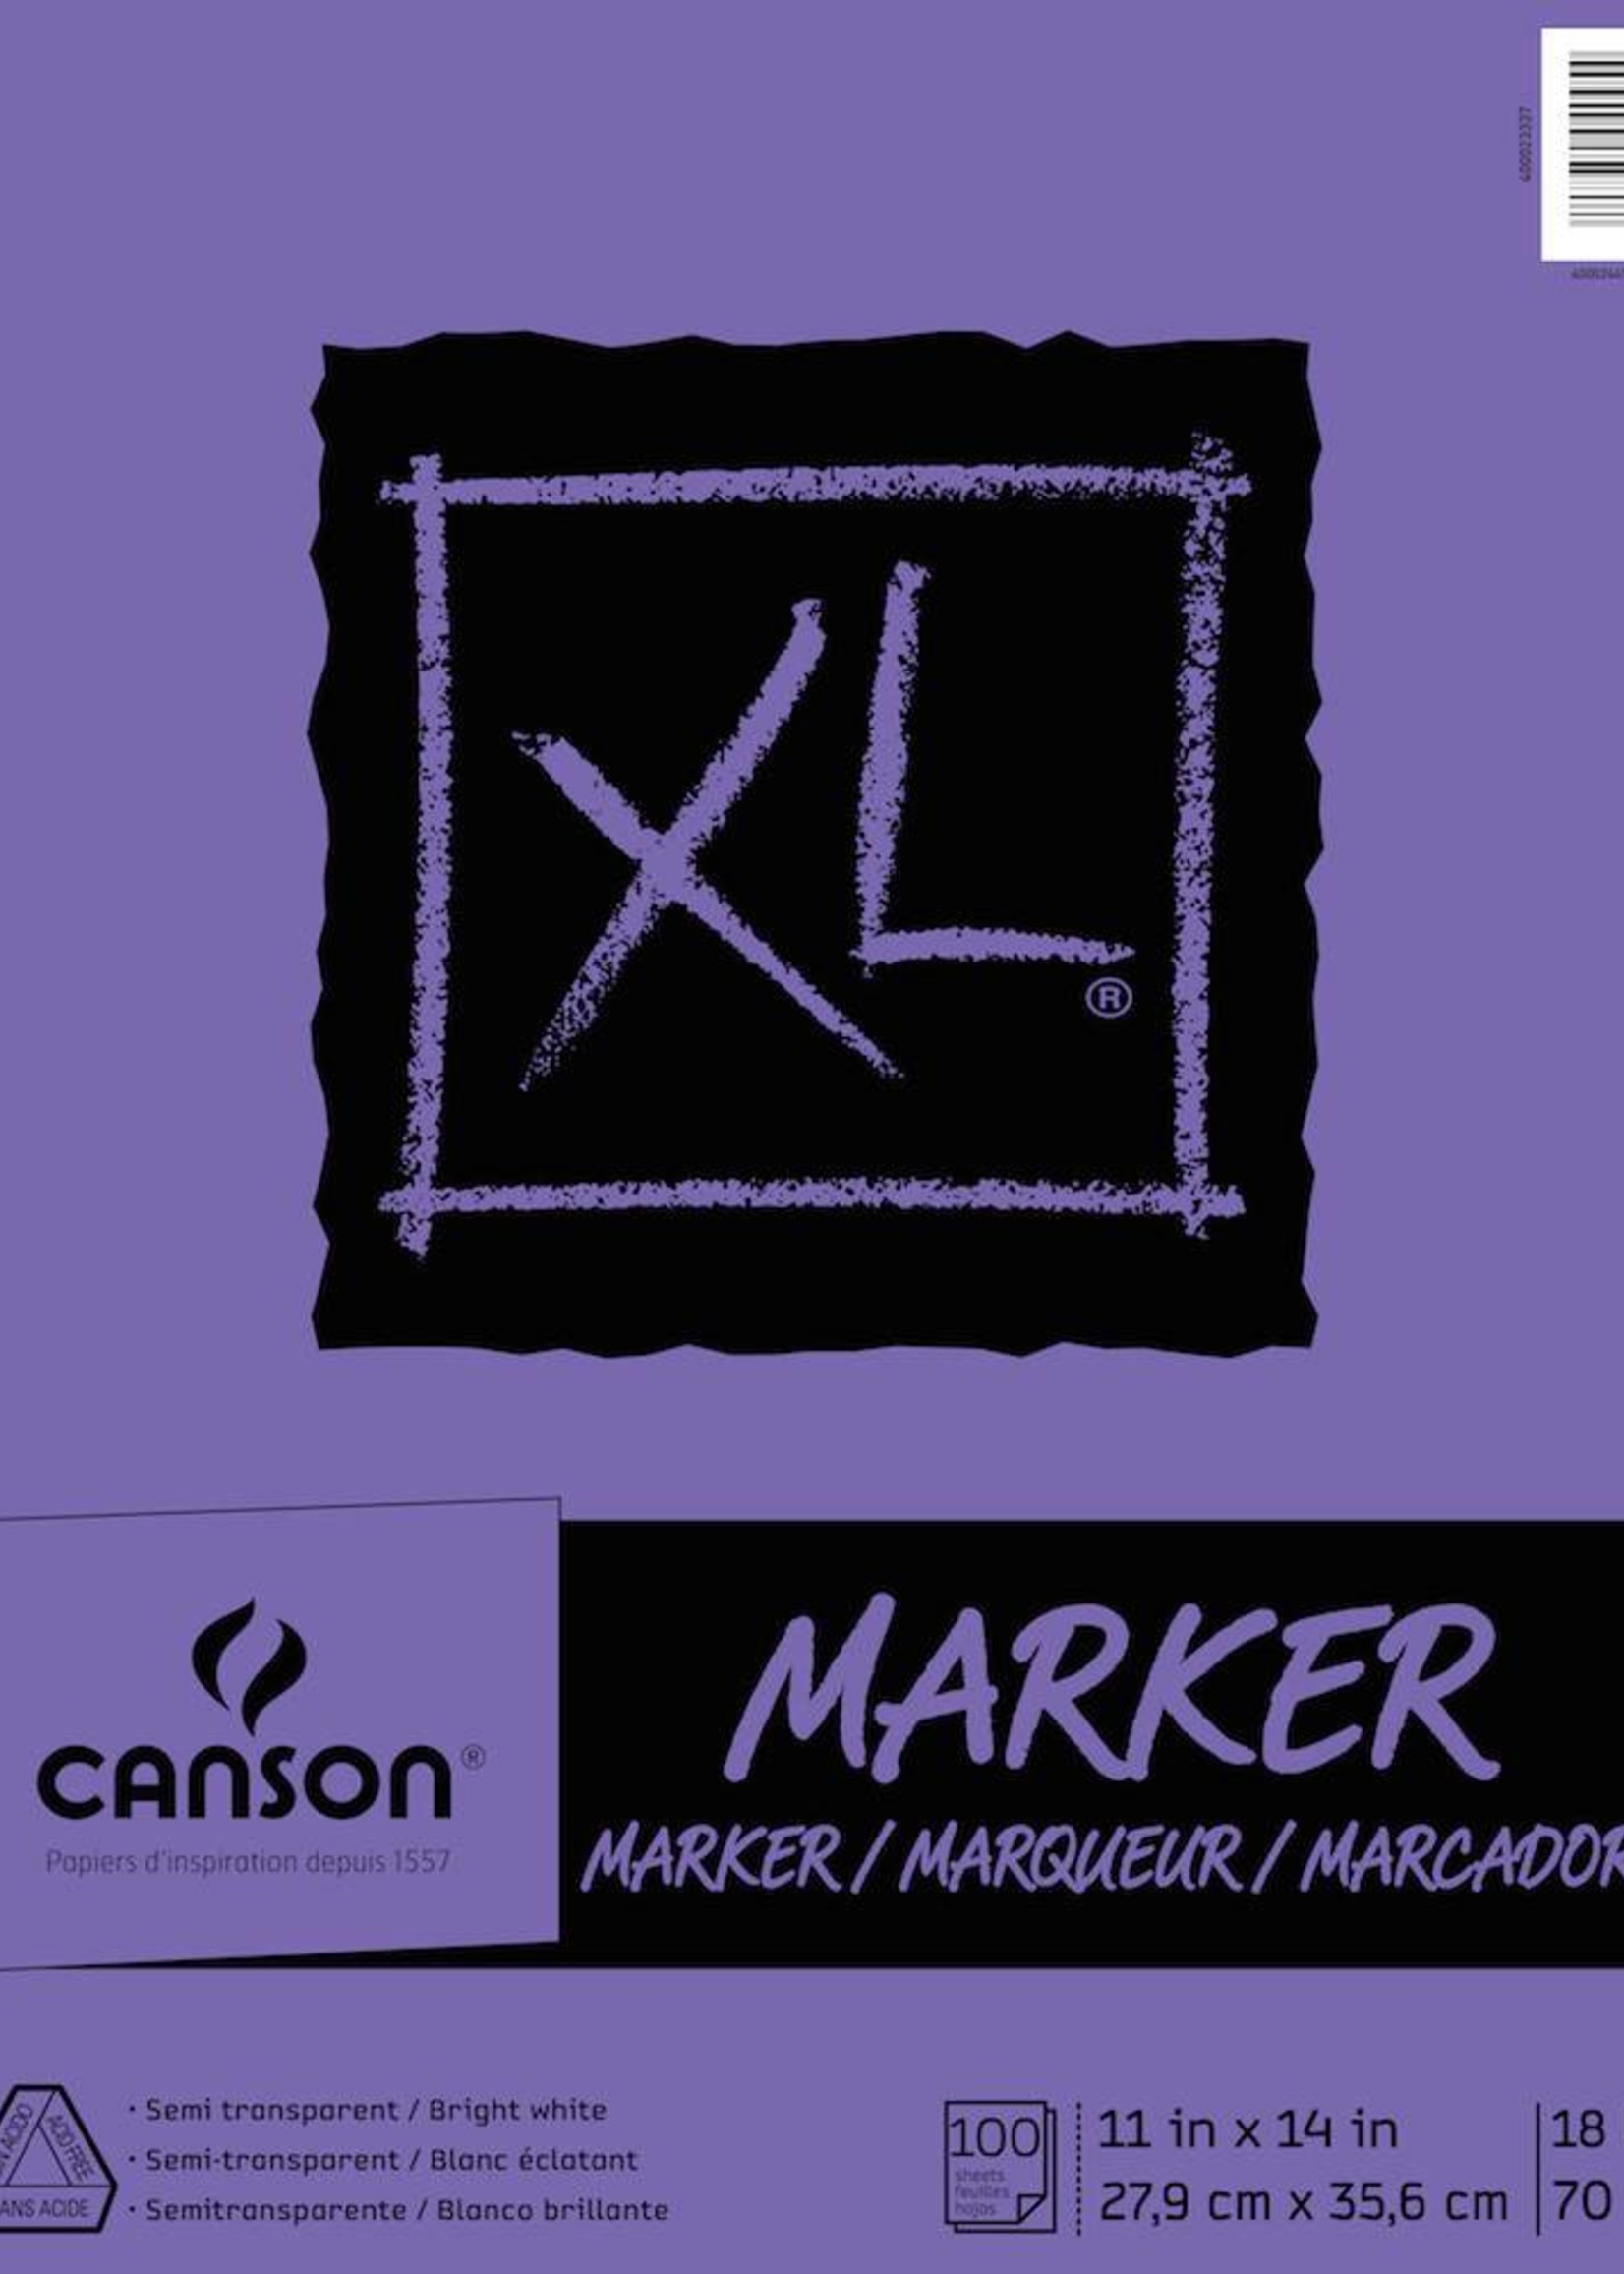 CANSON CANSON XL MARKER PAD 18LB TAPE BOUND  100/SHT